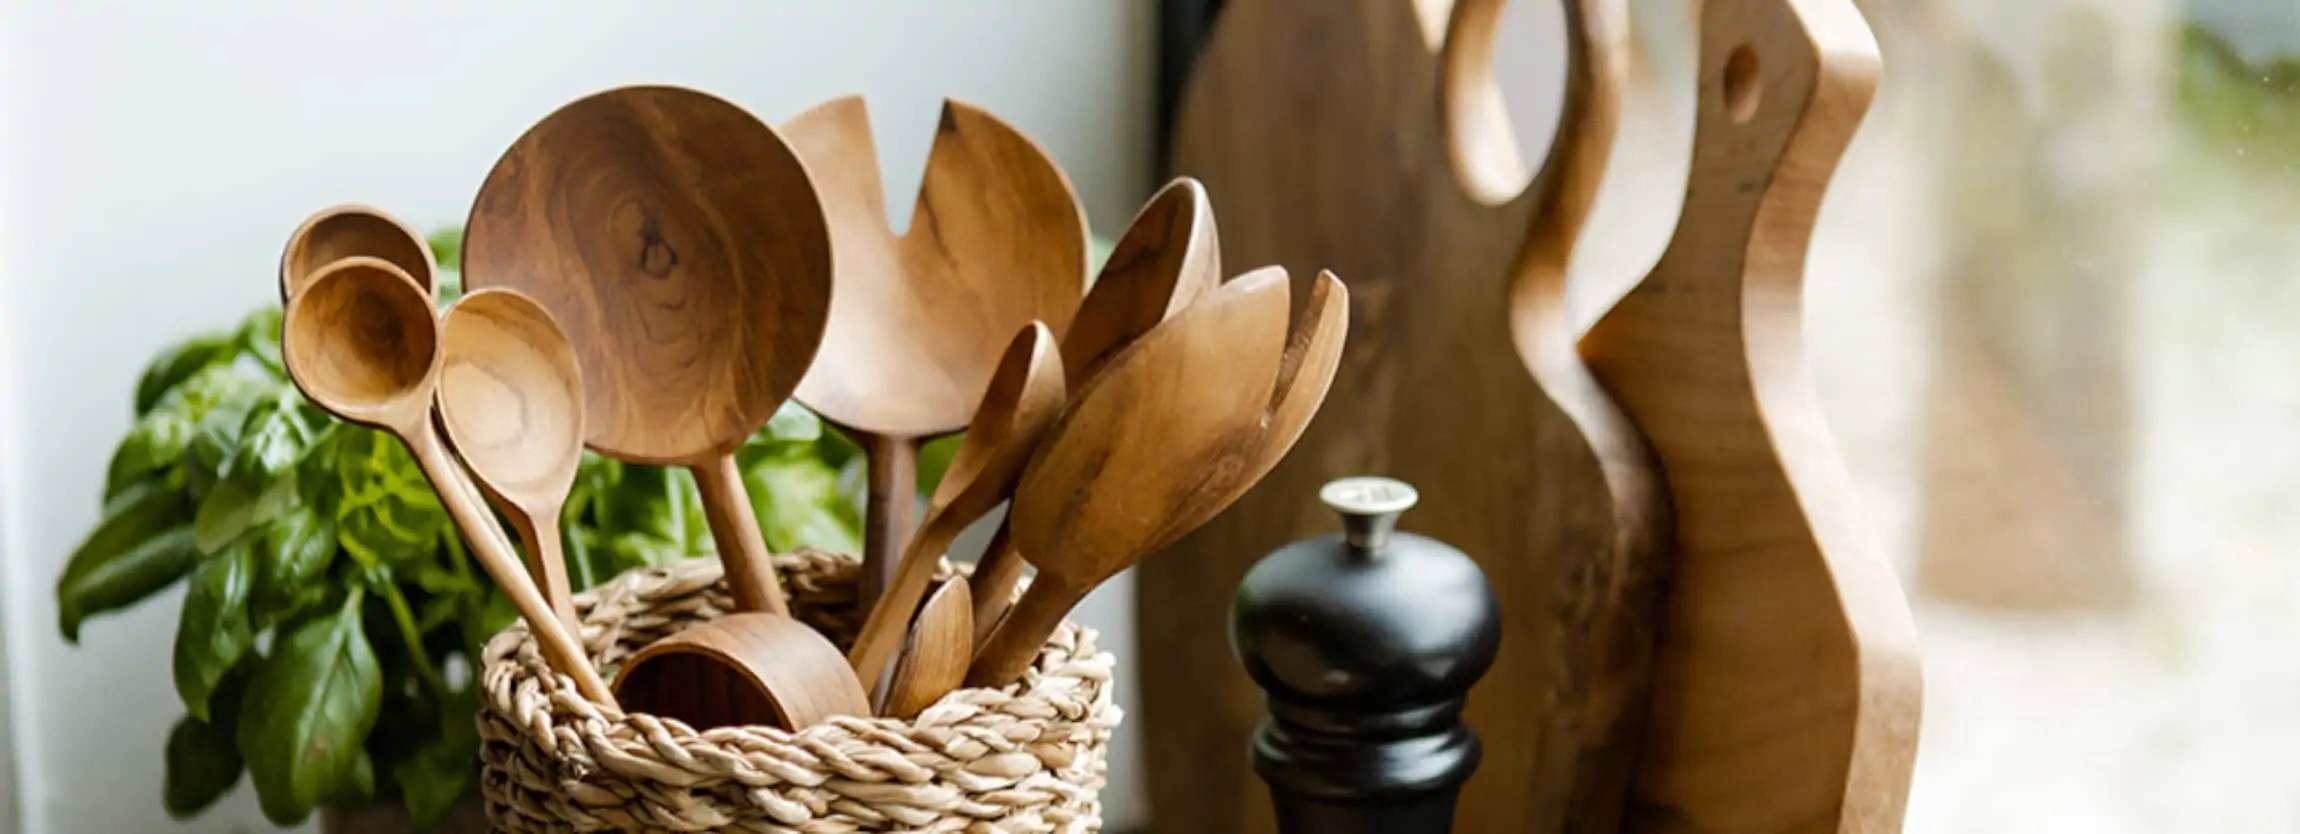 teak root wood products spoons plates trays